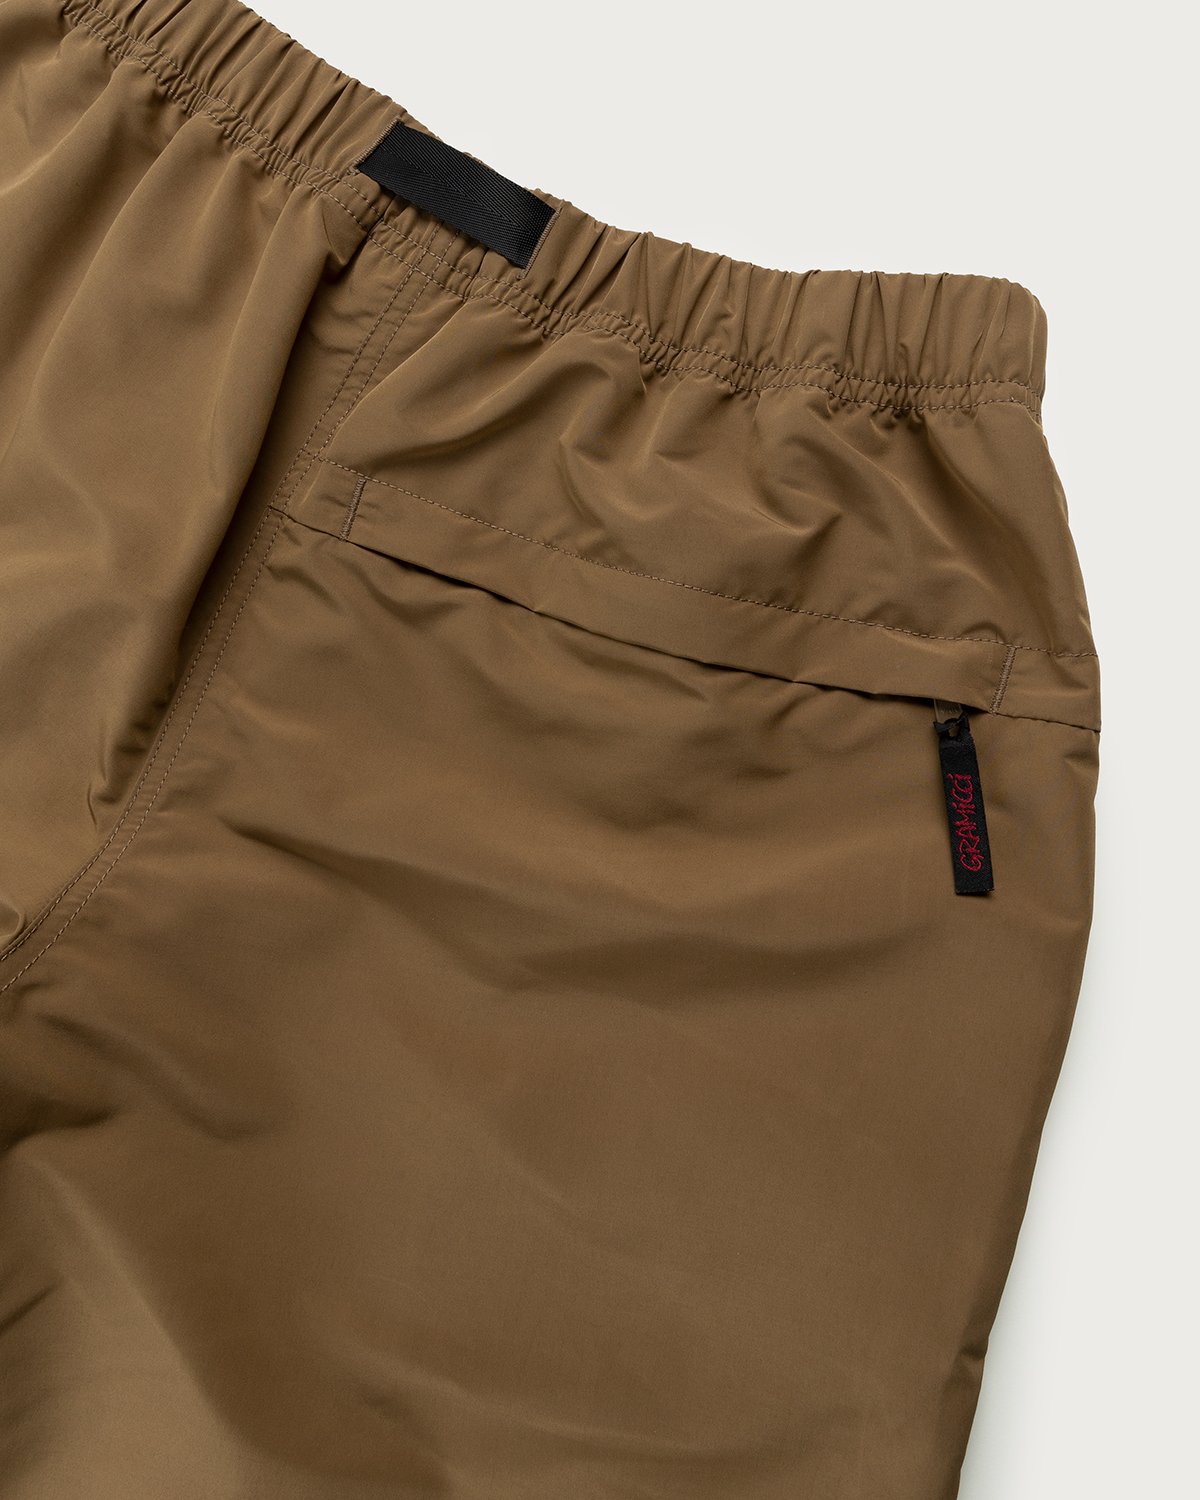 Gramicci x Highsnobiety - HS Sports Shell Packable Shorts Tan - Clothing - Brown - Image 3